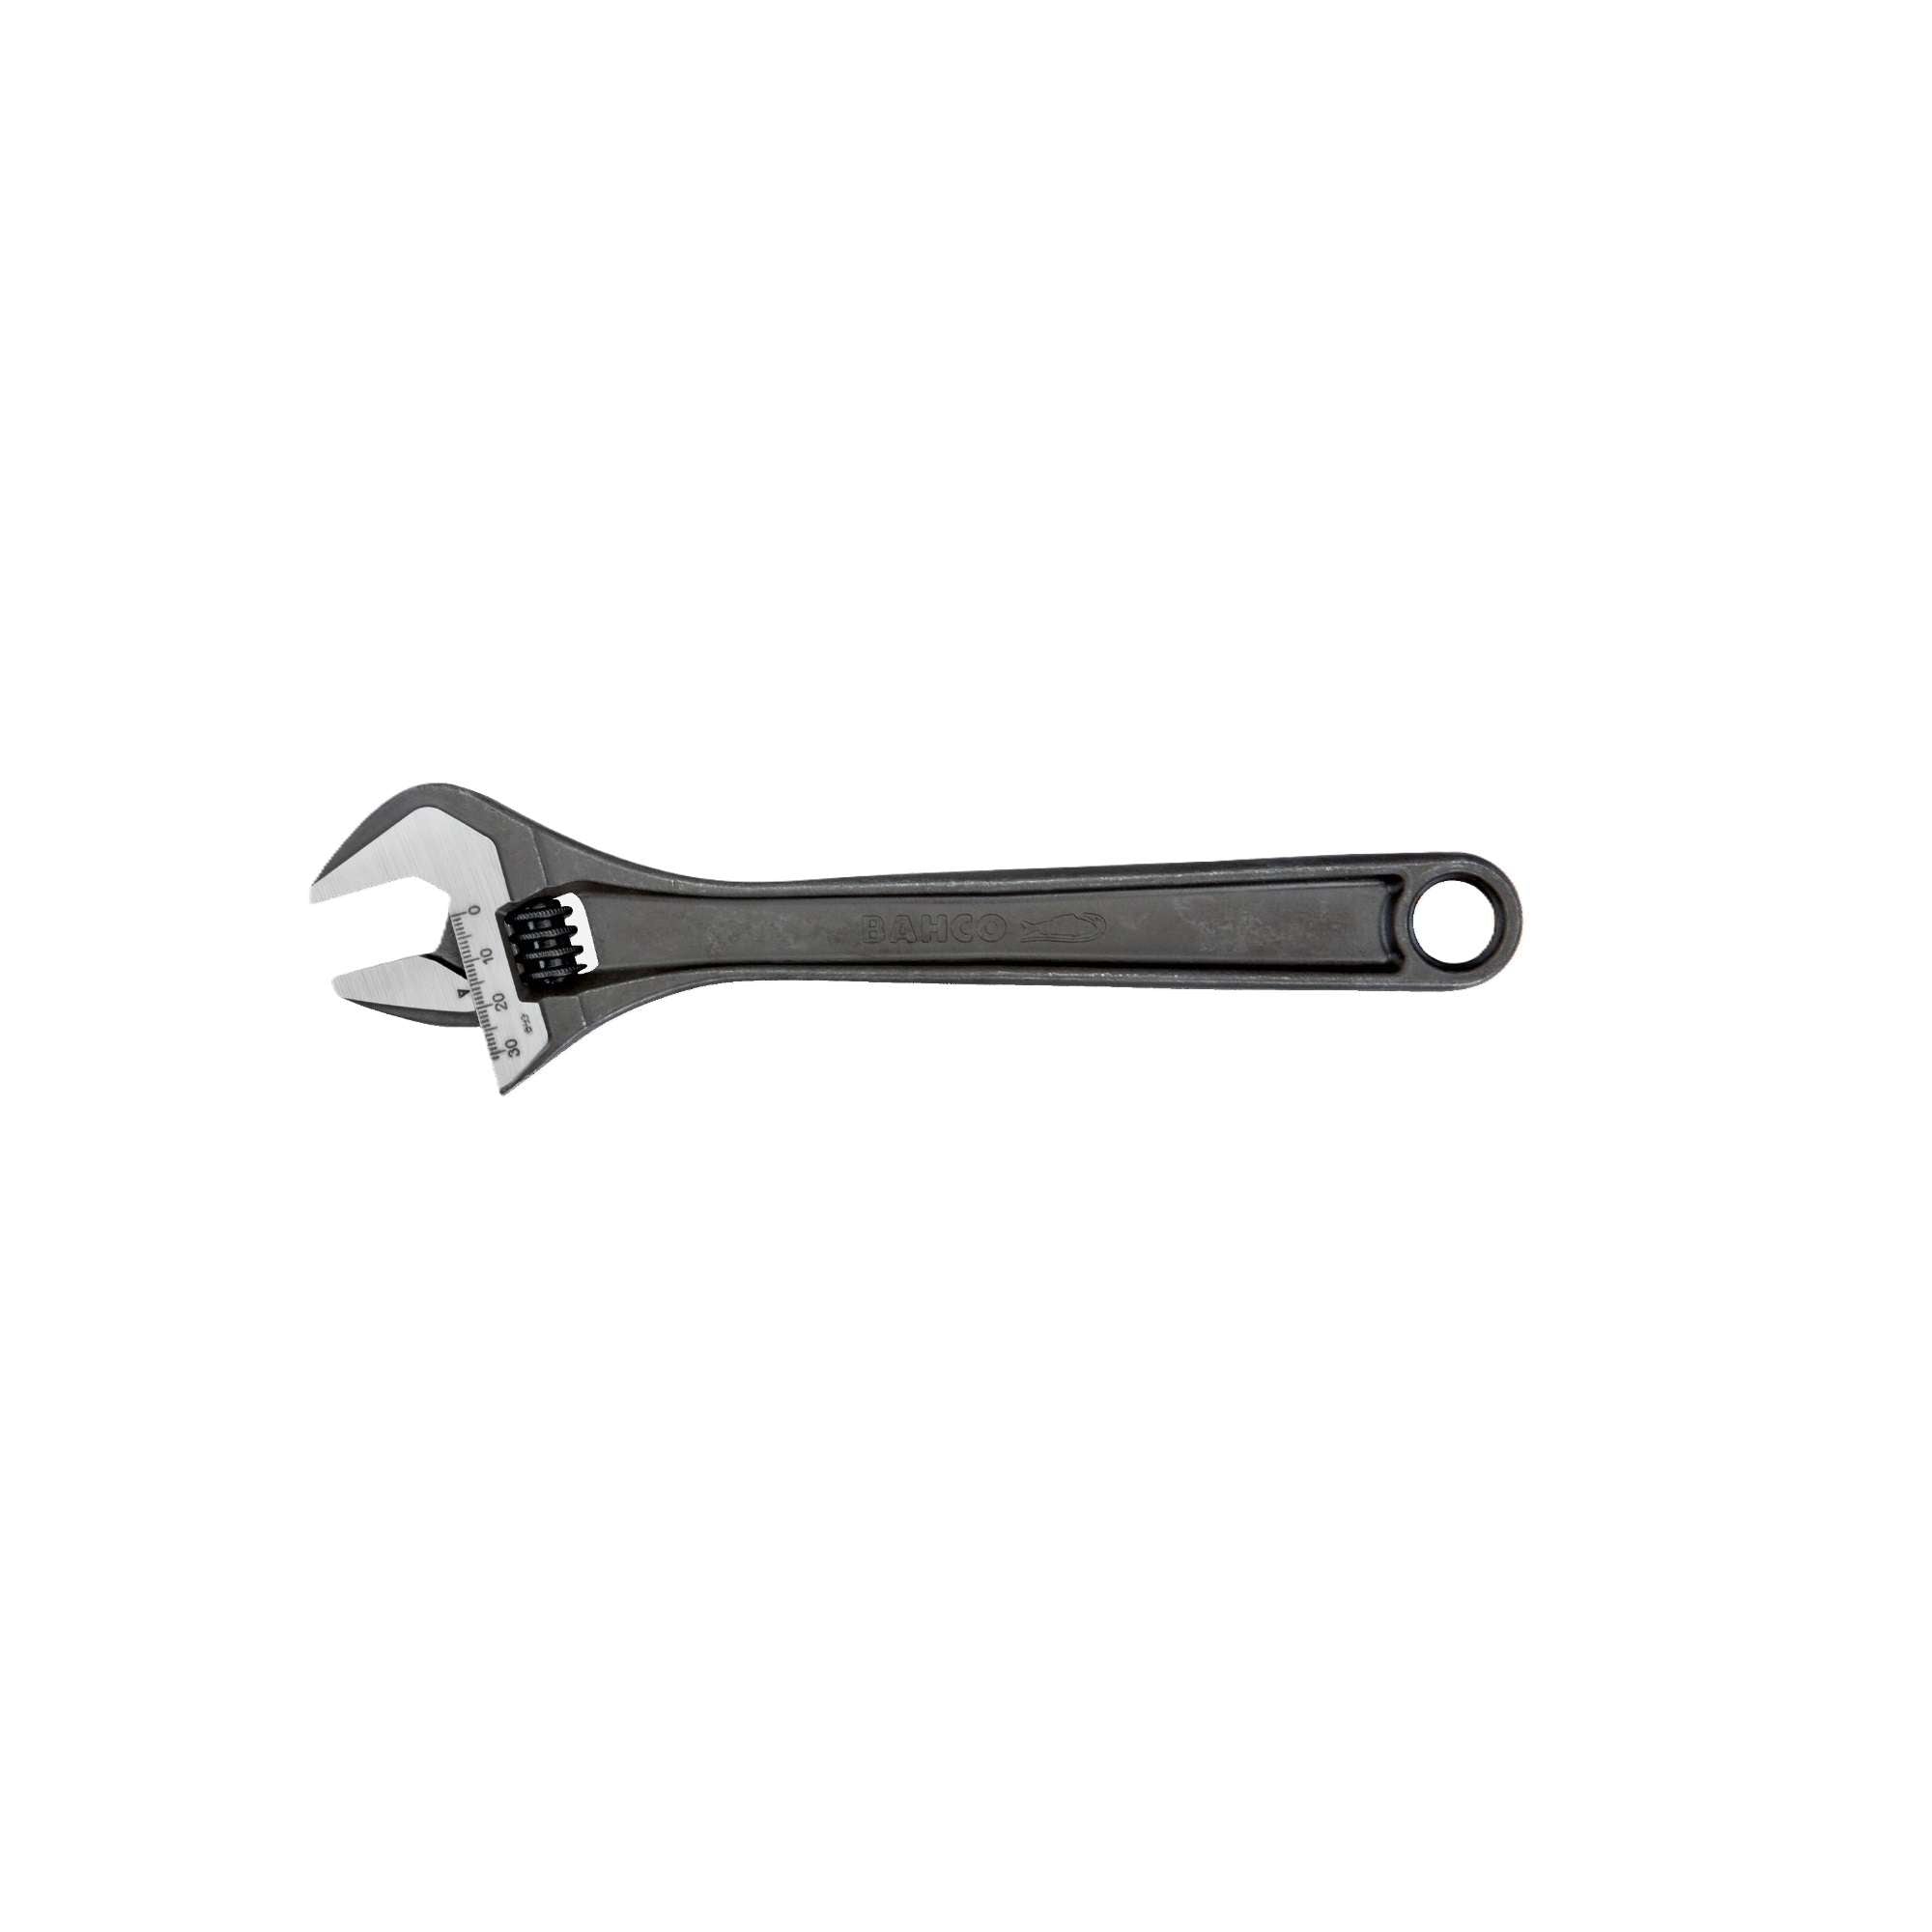 Roller wrench with phosphate finish, laser scale in mm - Bahco 80